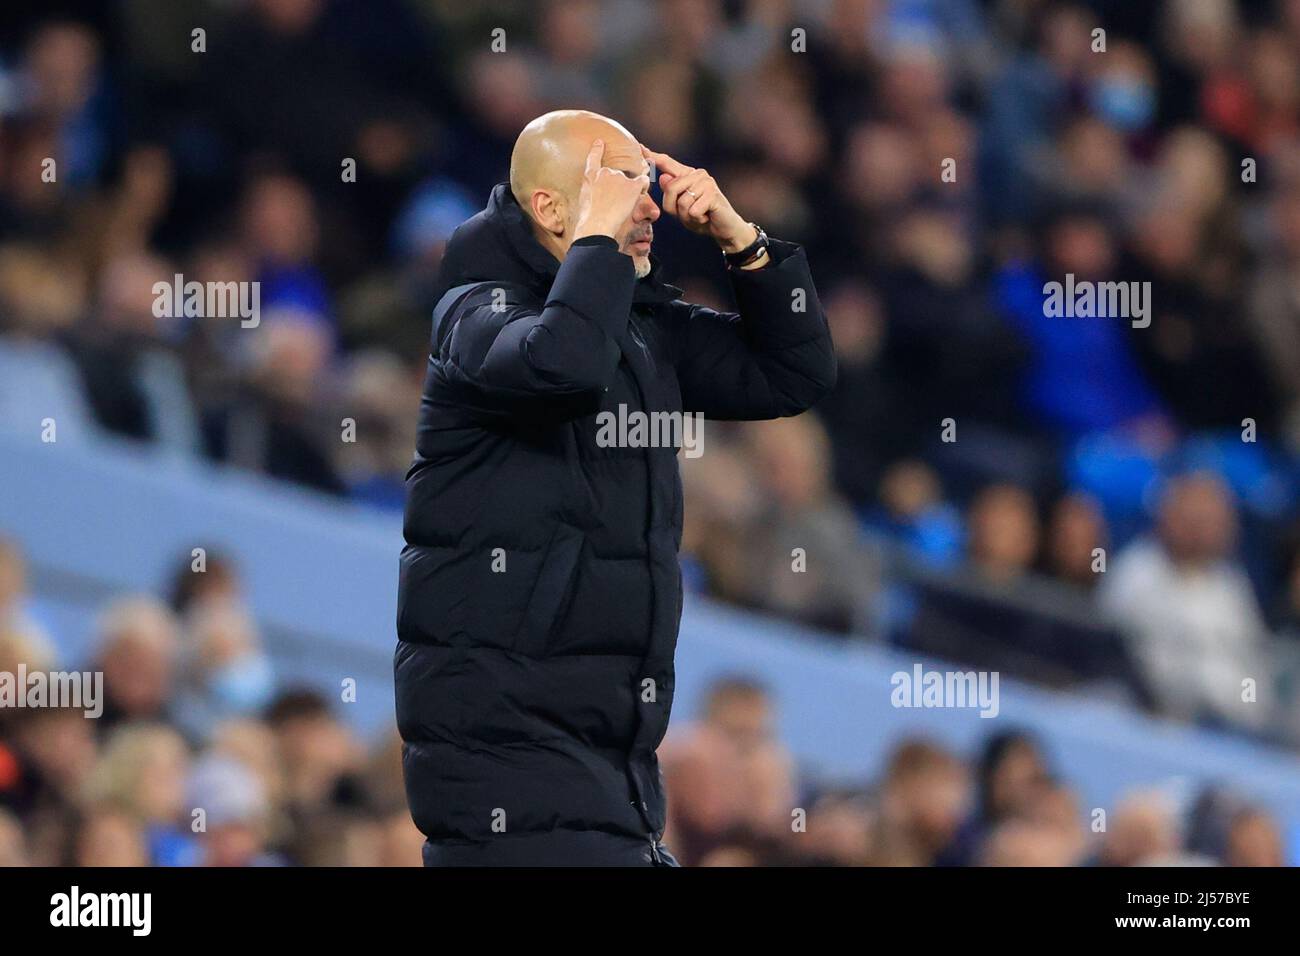 Manchester, UK. 20th Apr, 2022. Pep Guardiola the Manchester City manager implores his players to think in Manchester, United Kingdom on 4/20/2022. (Photo by Conor Molloy/News Images/Sipa USA) Credit: Sipa USA/Alamy Live News Stock Photo